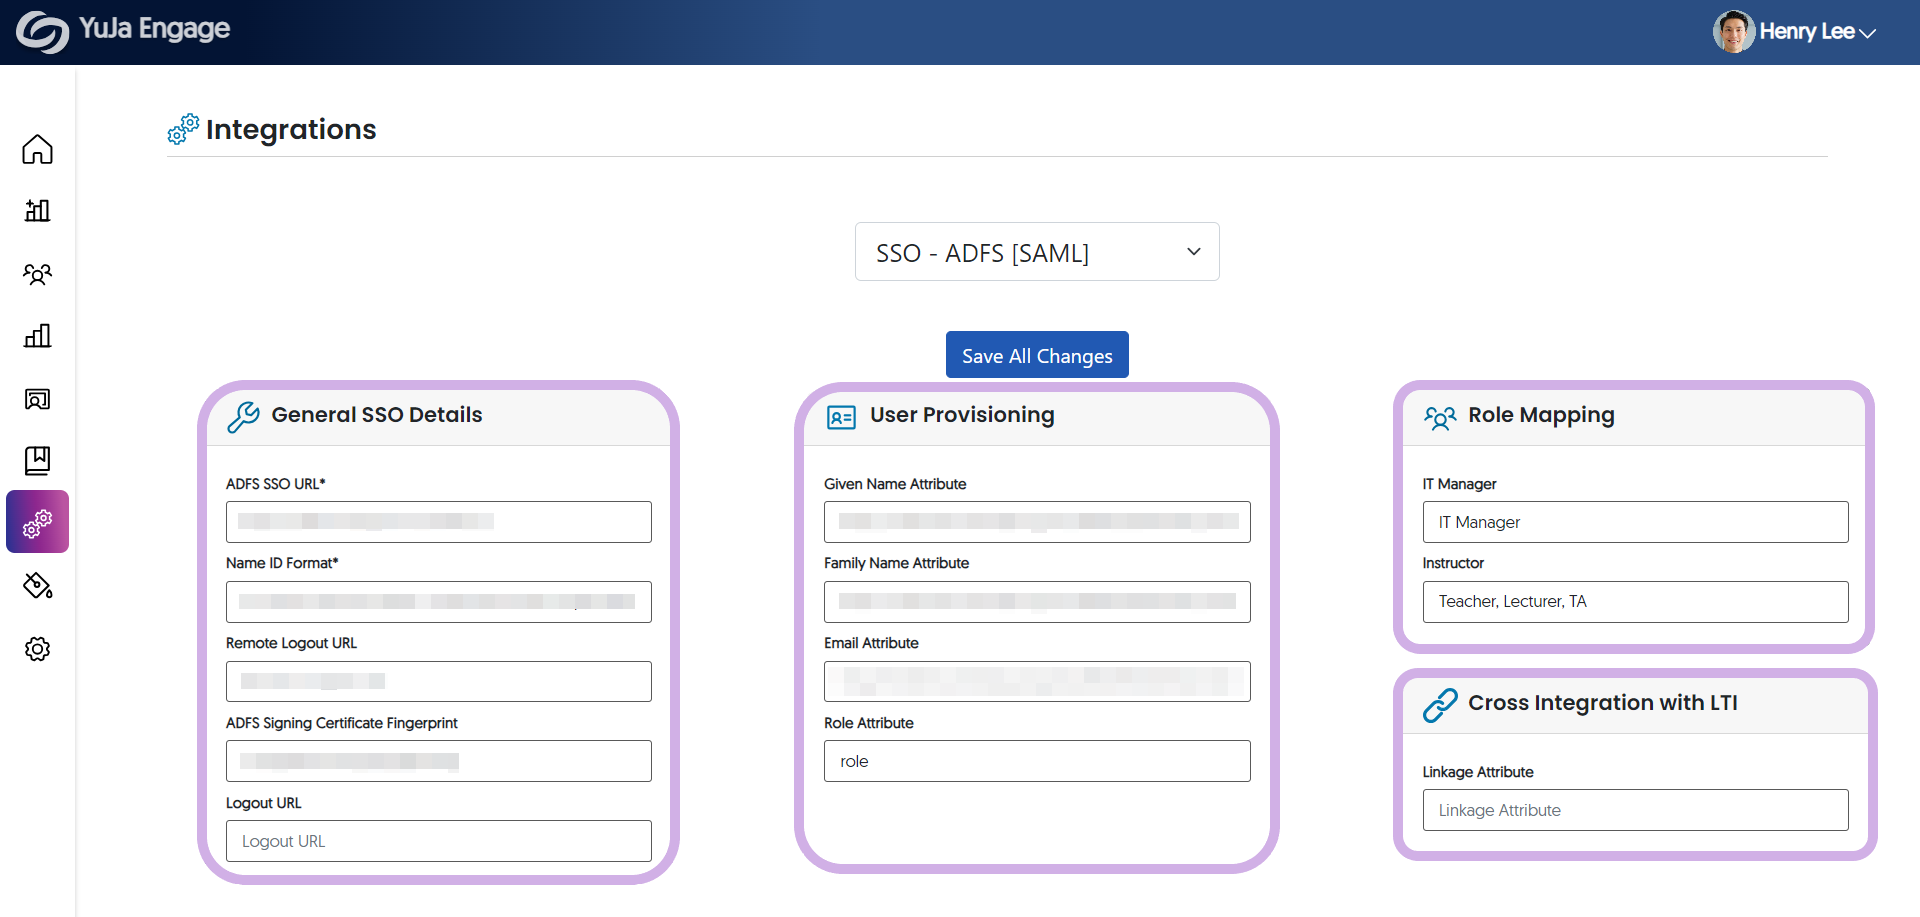 The YuJa Engage SSO ADFS integrations page shows information for the integration filled out.